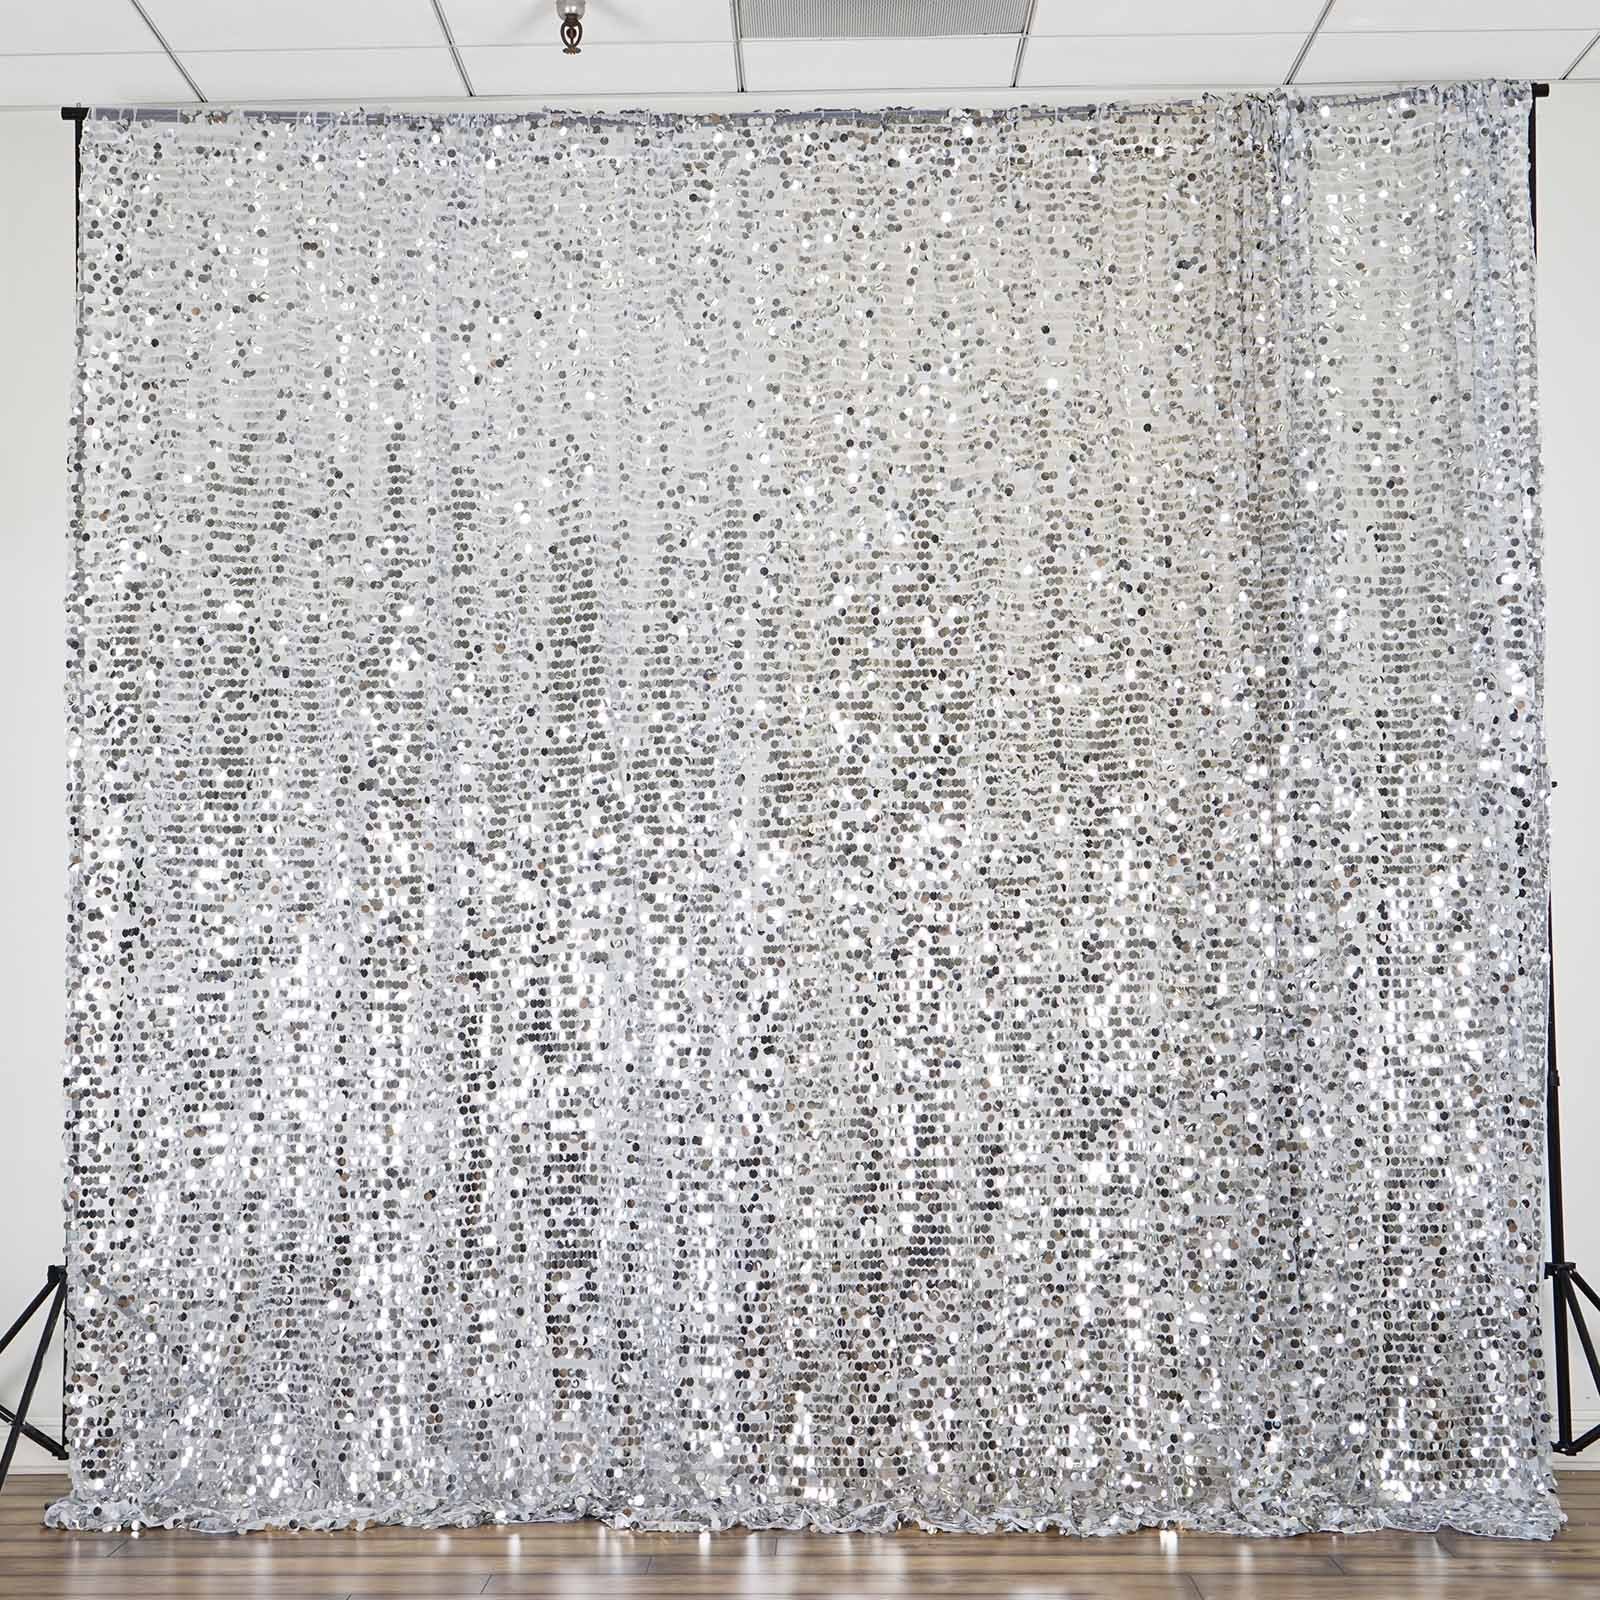 ft Silver Big Payette Sequin Curtain Panel Backdrop Wedding Party Photography Background 1 Pcs Tableclothsfactory Com